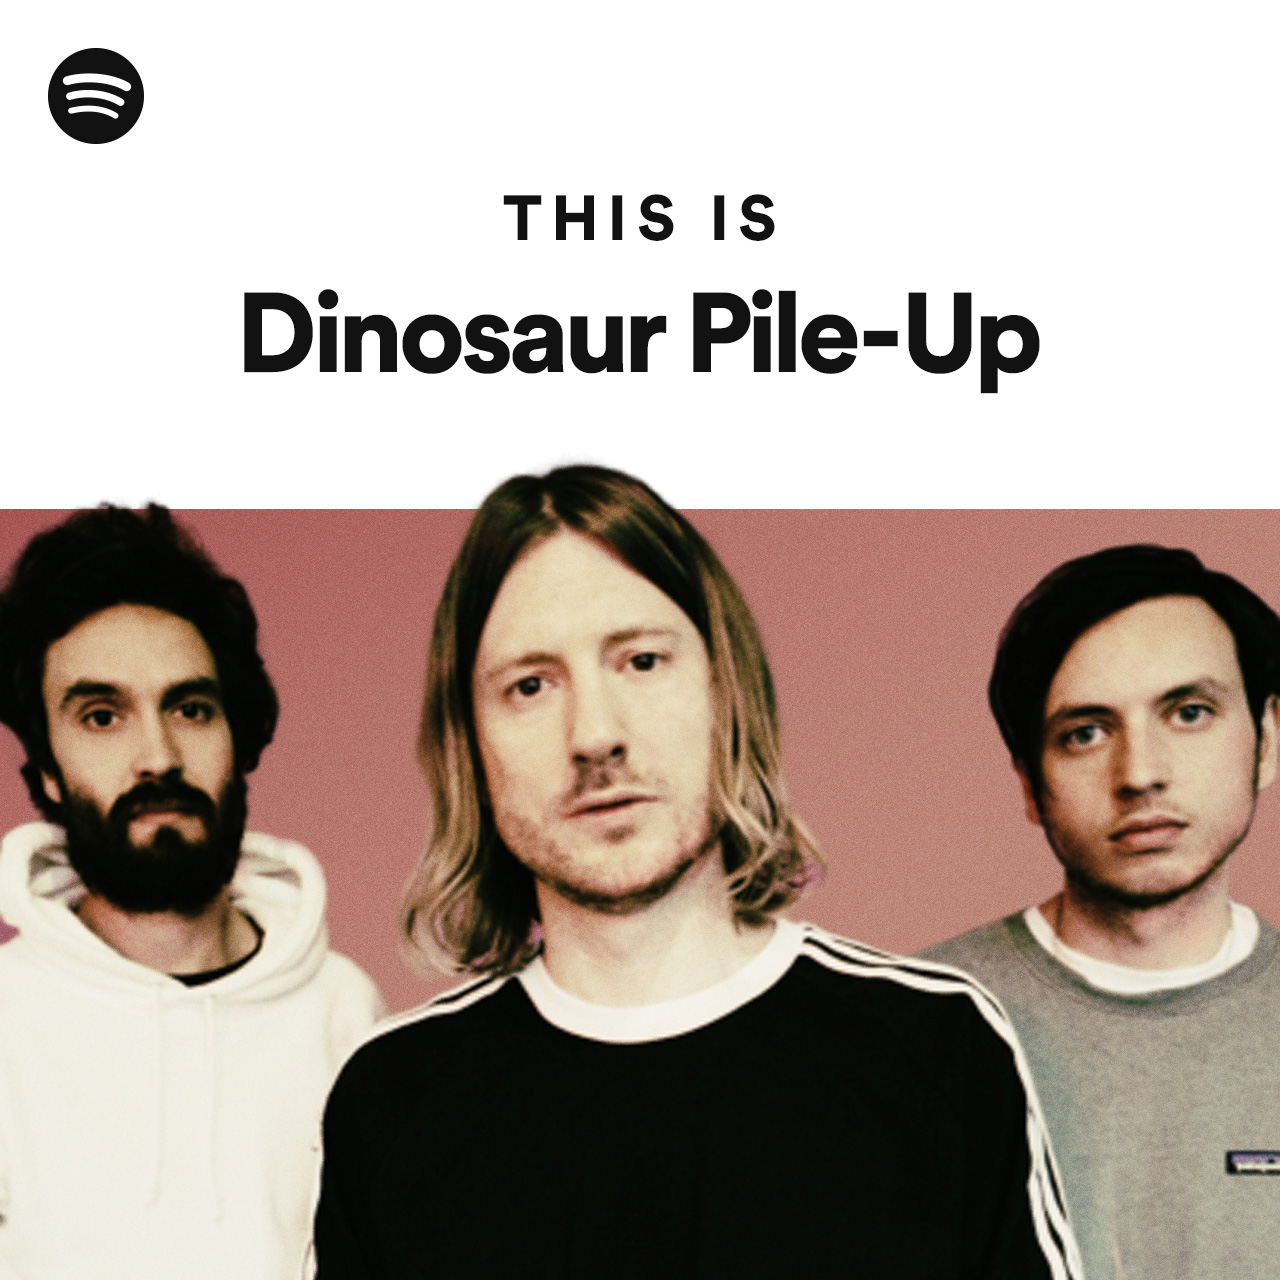 This Is Dinosaur Pile-Up